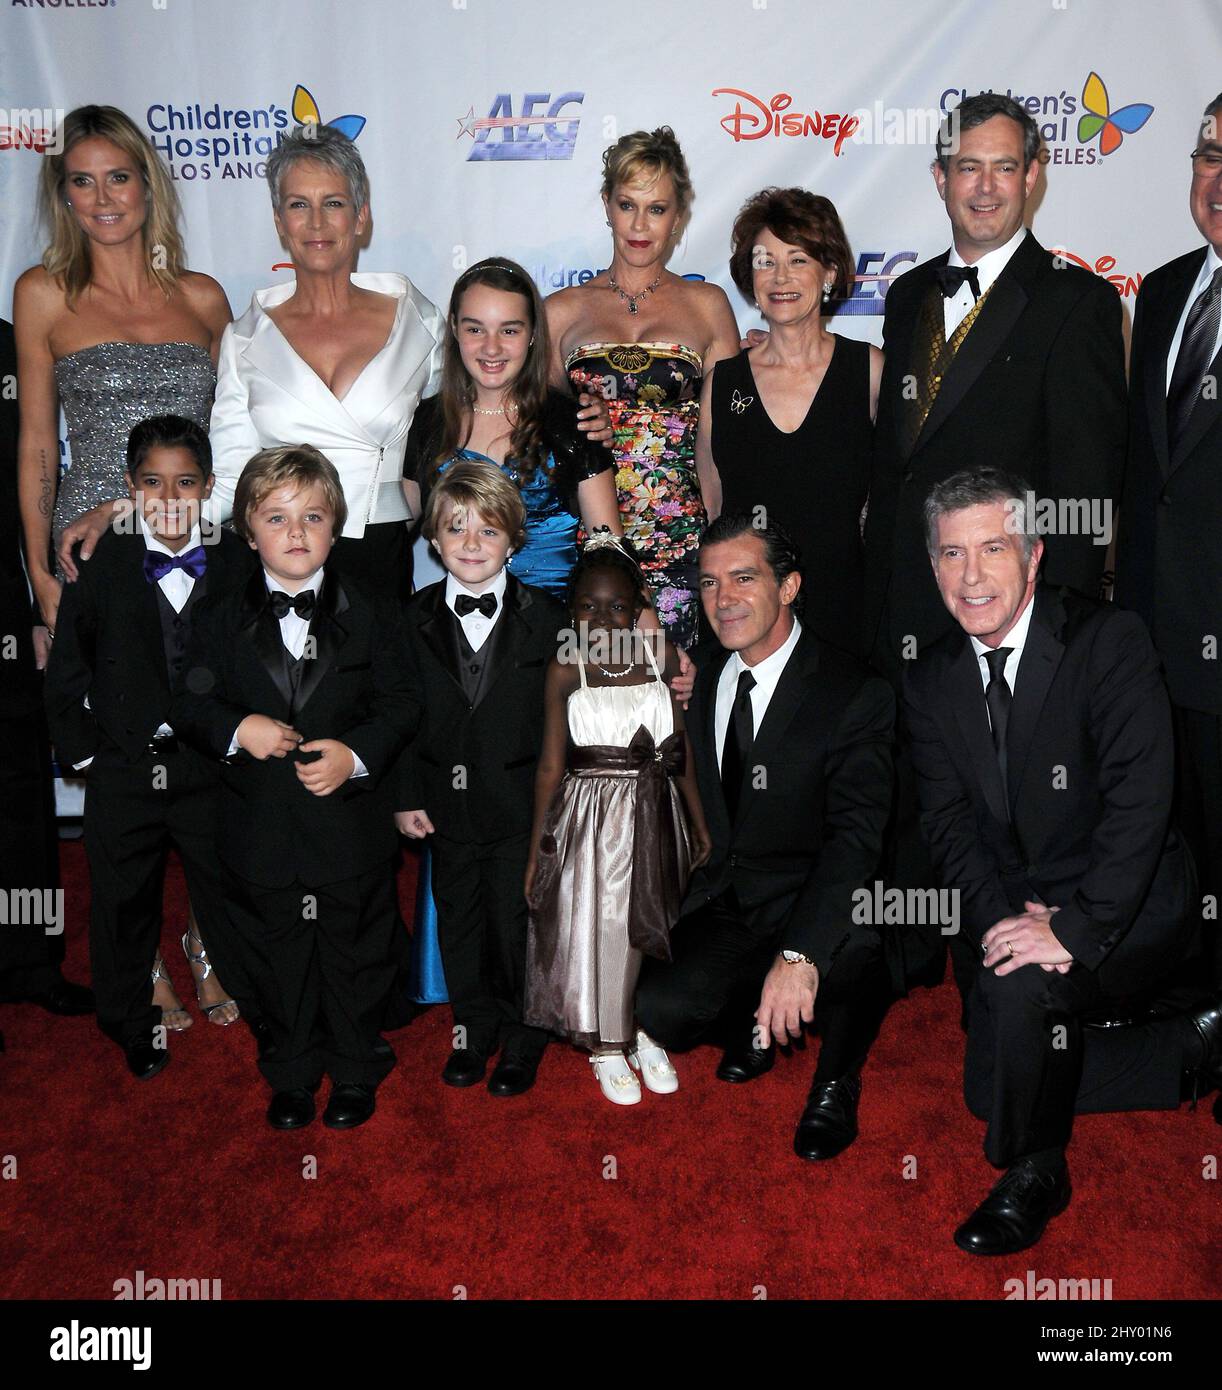 Heidi Klum, Jamie Lee Curtis, Melanie Griffith and Antonio Banderas during the Children's Hospital Los Angeles Gala 'Noche De Ninos' Held at L.A. Live Event Deck, Los Angeles Stock Photo